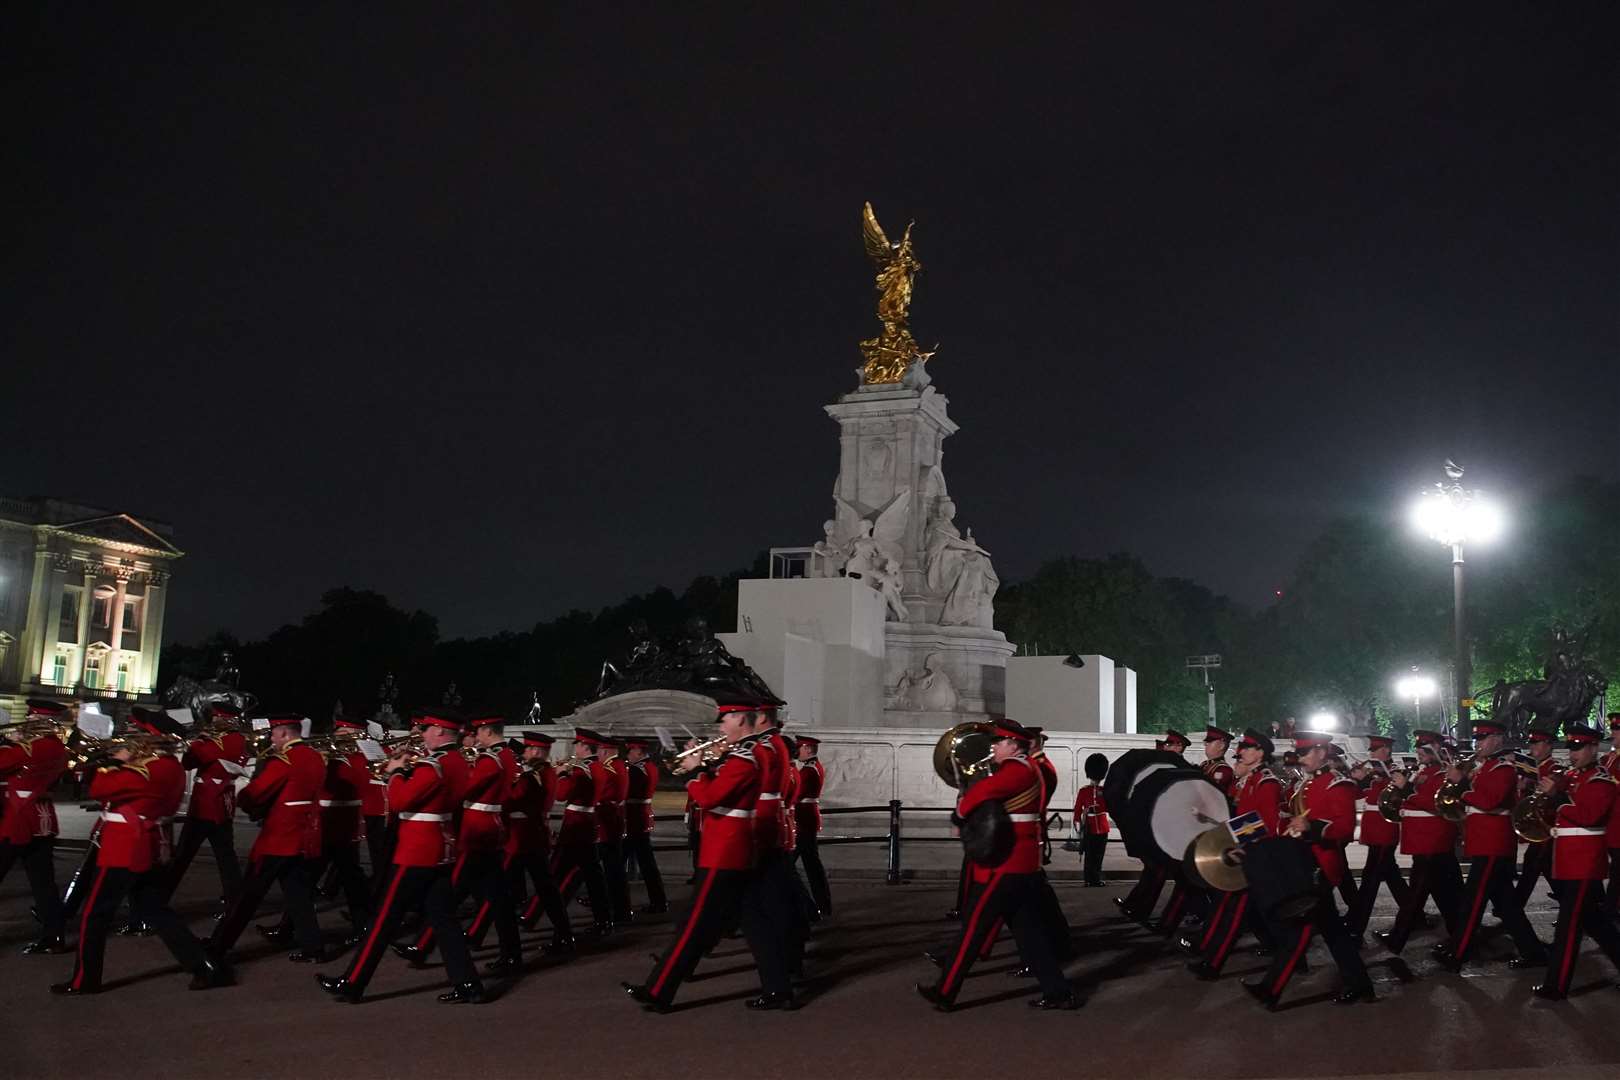 Drums and trumpets accompanied the procession and could be heard from streets away, as the rest of the city remained largely silent (Gareth Fuller/PA)